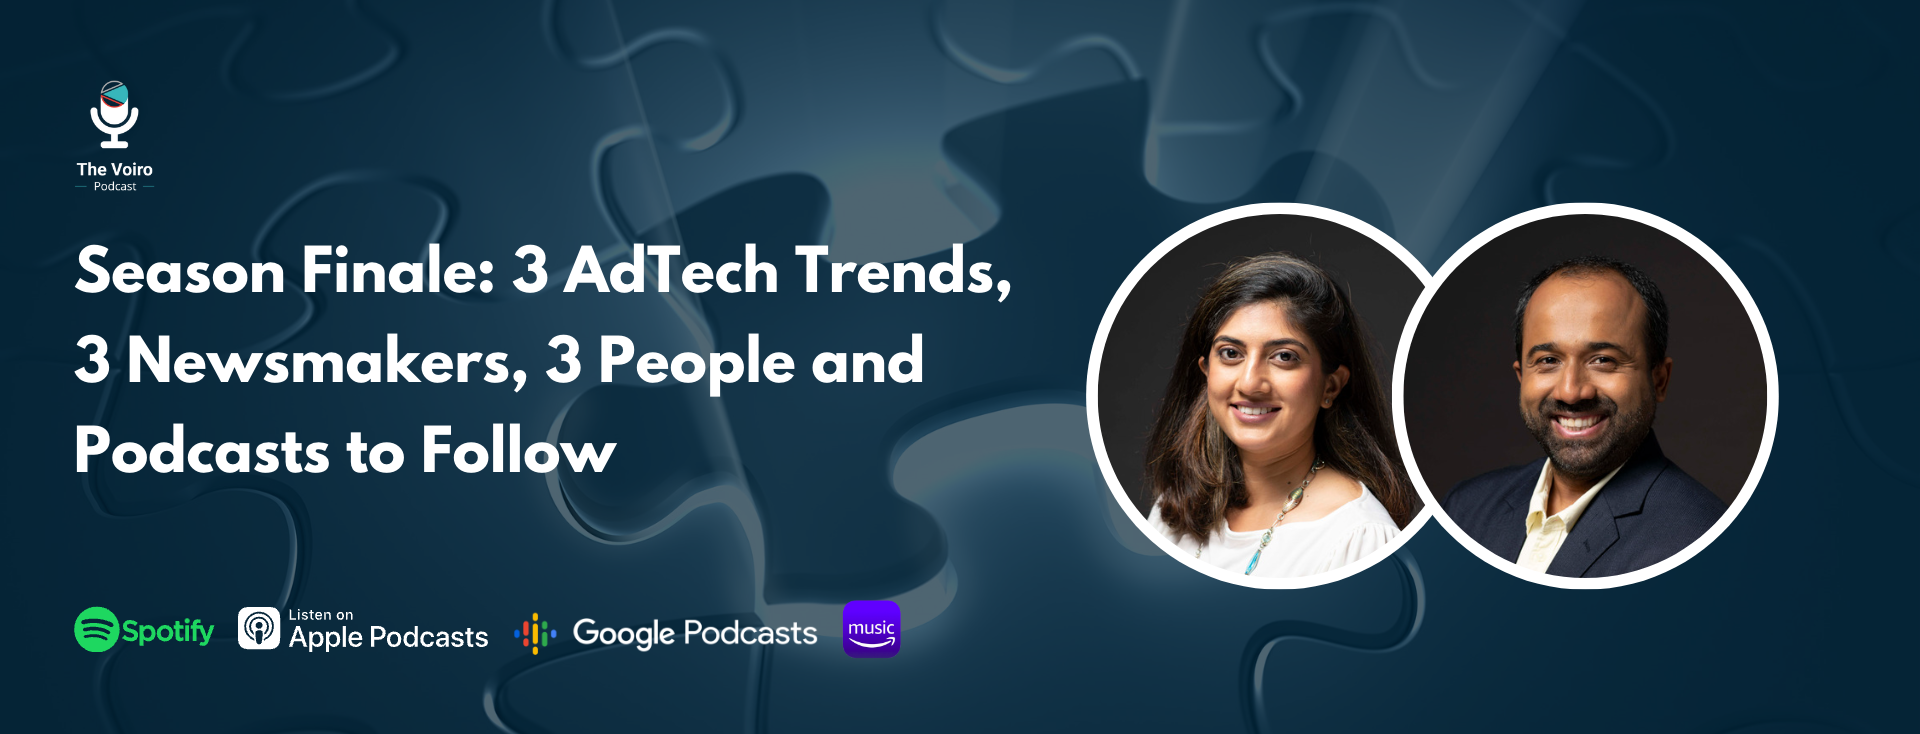 Season Finale: 3 AdTech Trends, 3 Newsmakers, 3 People and Podcasts to Follow